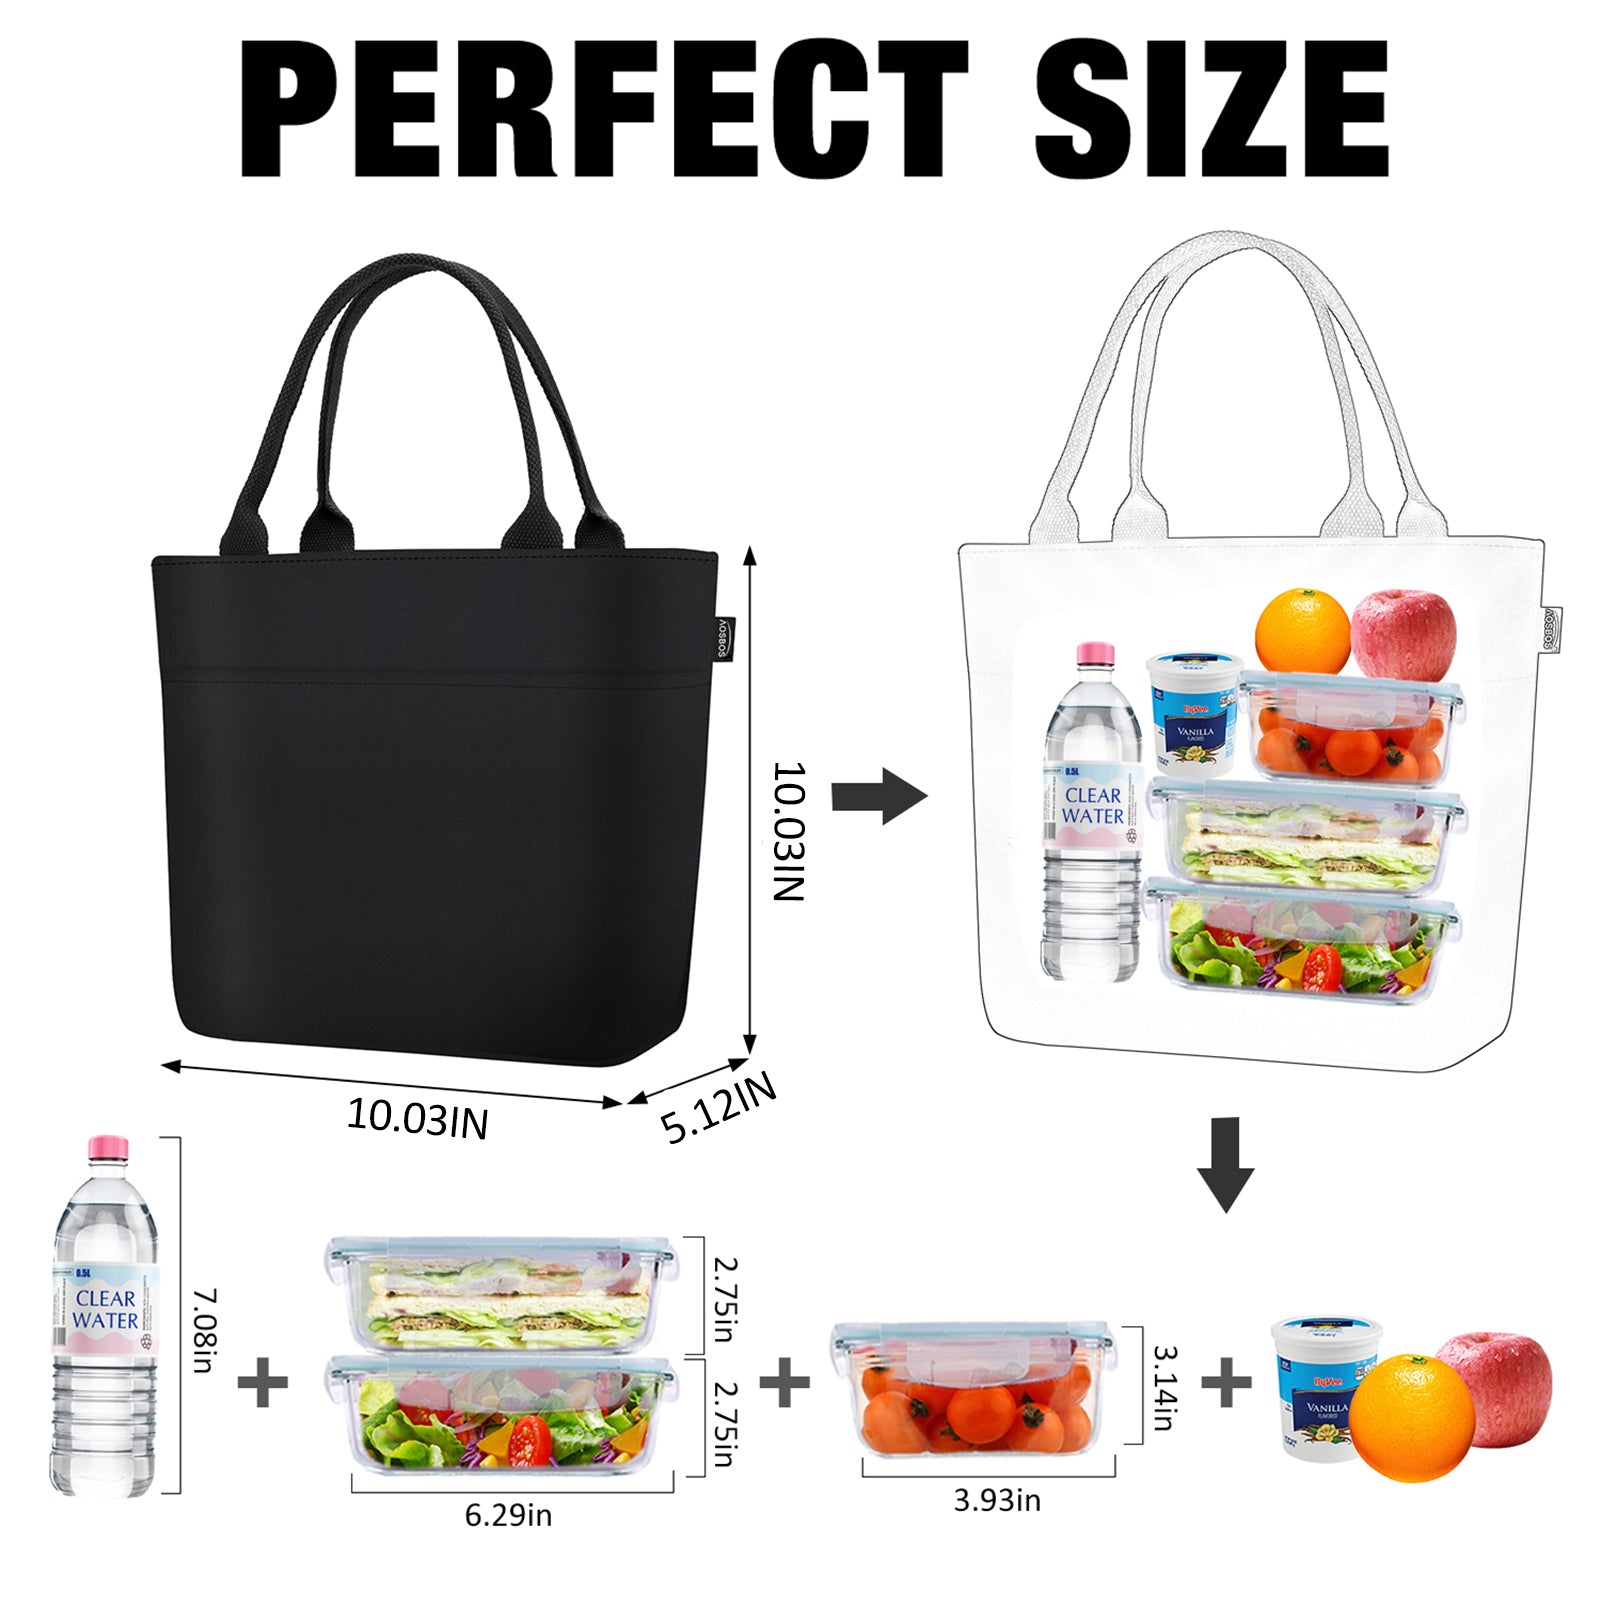 Aosbos Insulated Lunch Box for Men Women Leakproof Cooler Bag Reusable  Lunch Tote Bag Adult Lunch Pa…See more Aosbos Insulated Lunch Box for Men  Women